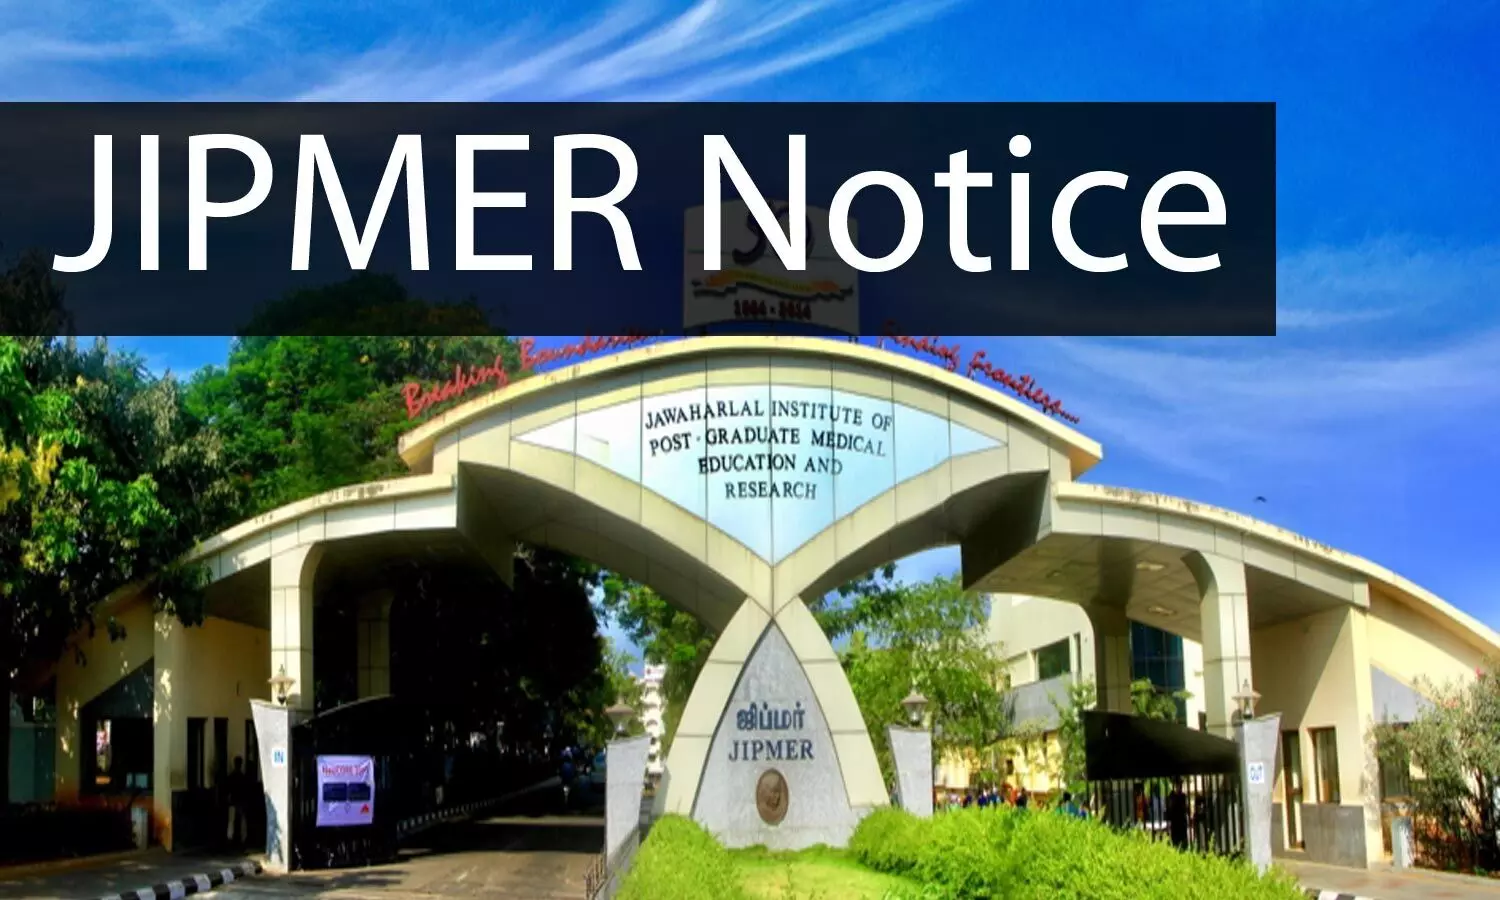 Upcoming Theory, Practical exams 2020: JIPMER issues notice